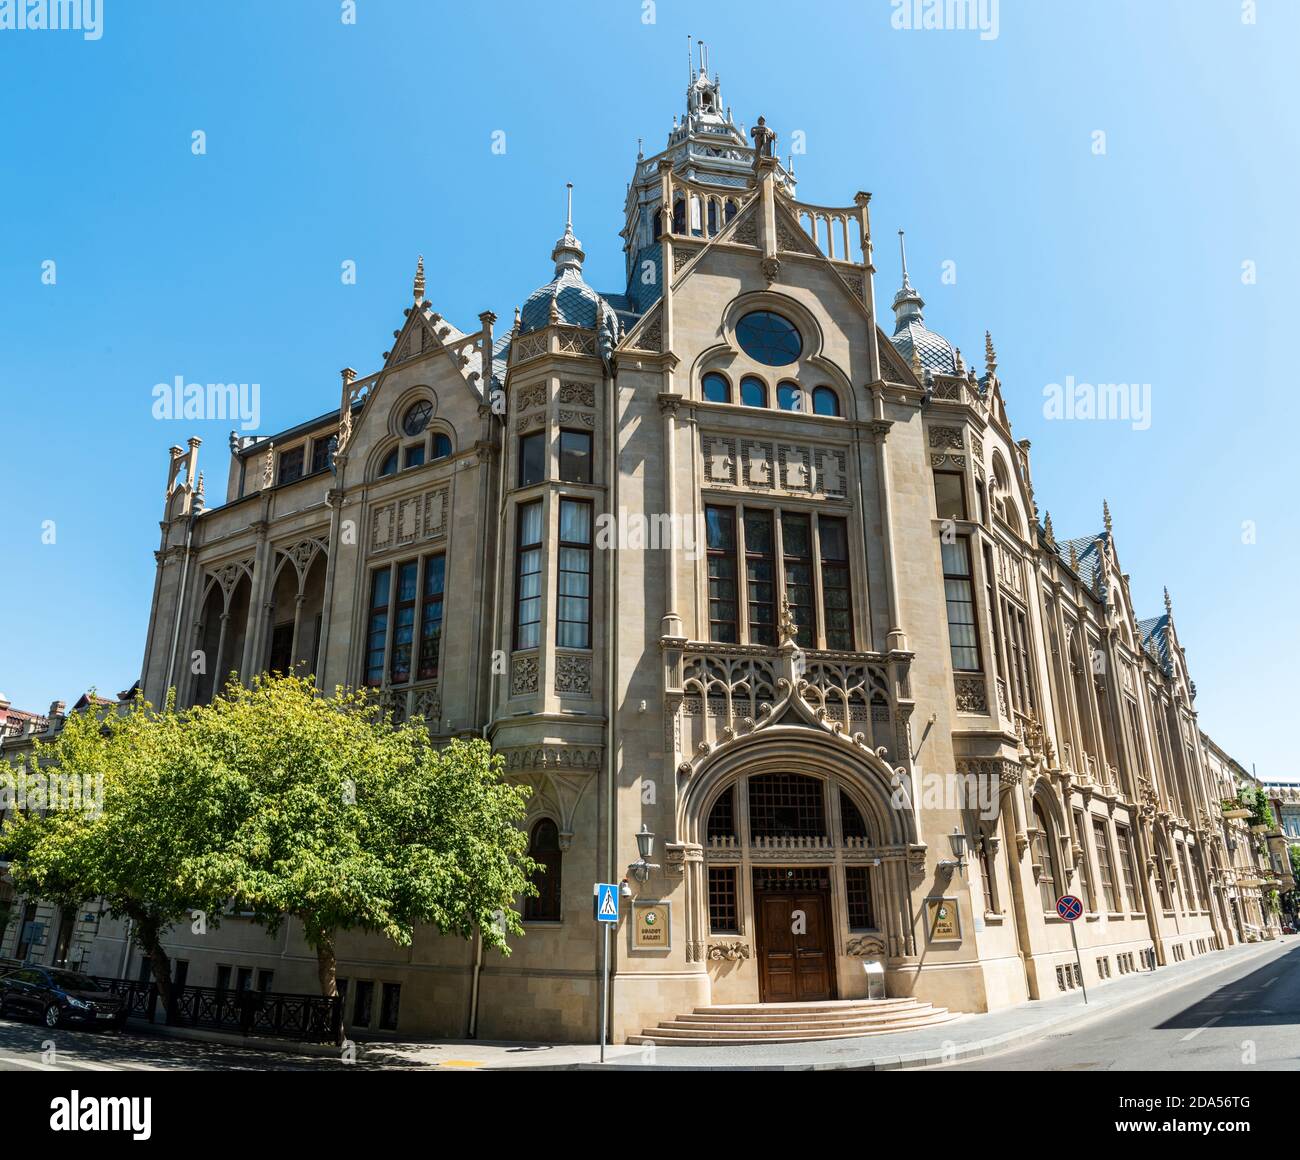 Baku, Azerbaijan – August 1, 2020. Mukhtarov Mansion in Baku. Dating from 1912, the building is now used as the Palace of Happiness for marriage regis Stock Photo